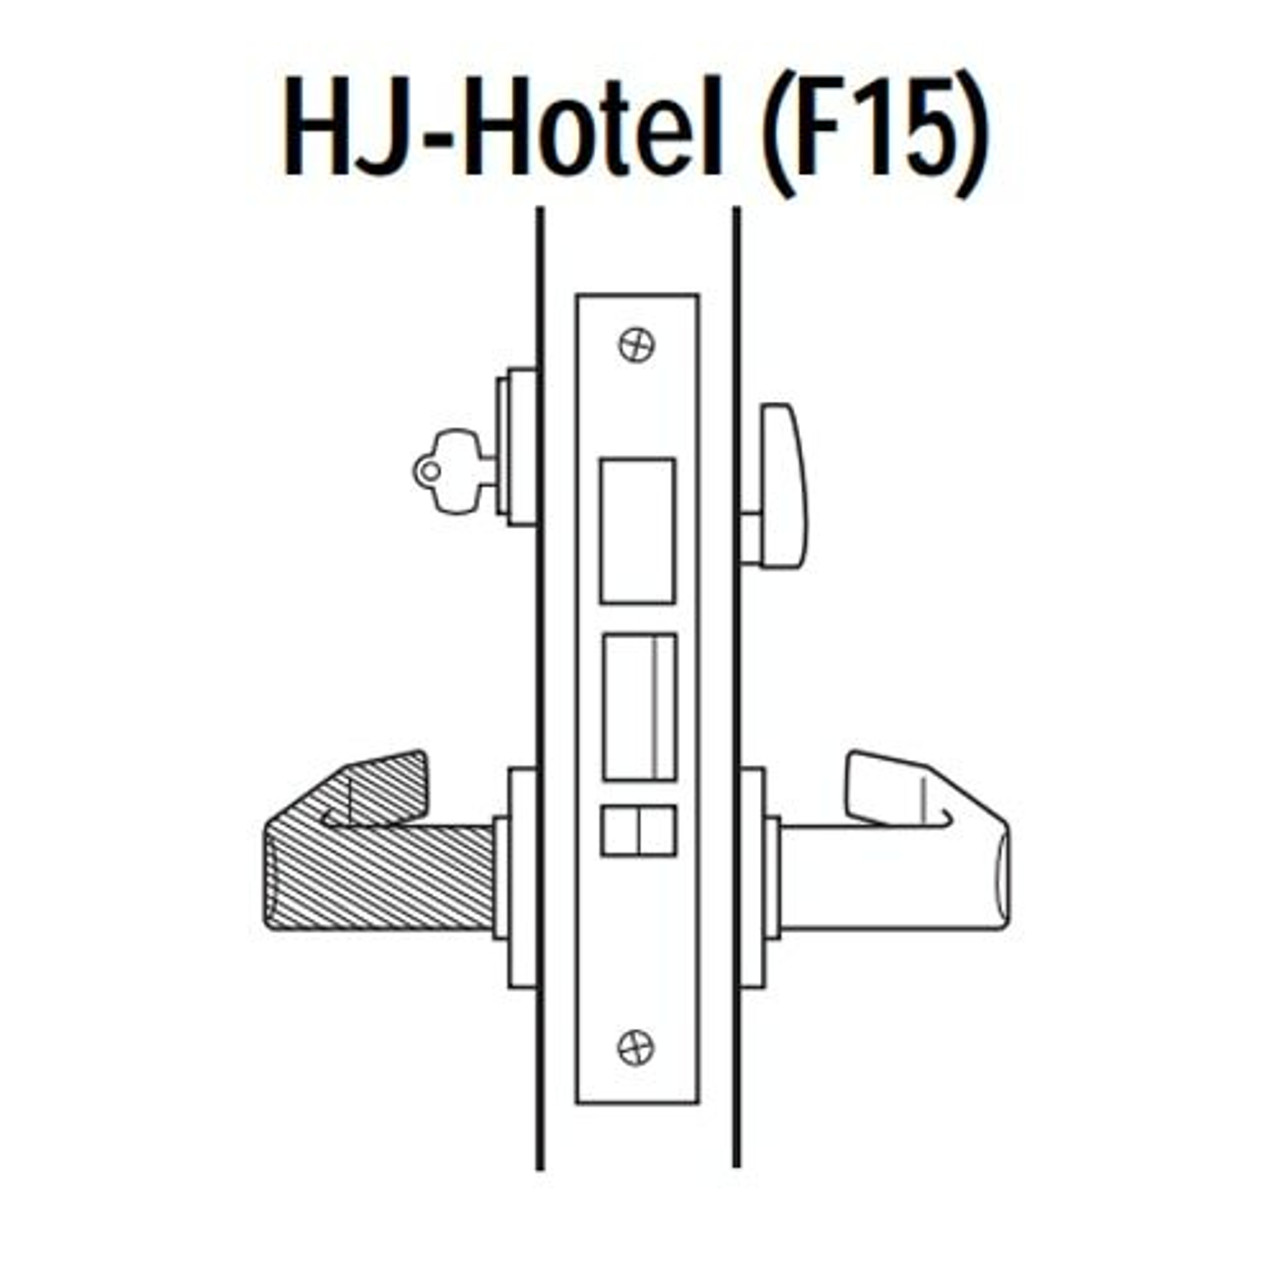 45H7HJ17RM618 Best 40H Series Hotel with Deadbolt Heavy Duty Mortise Lever Lock with Gull Wing RH in Bright Nickel